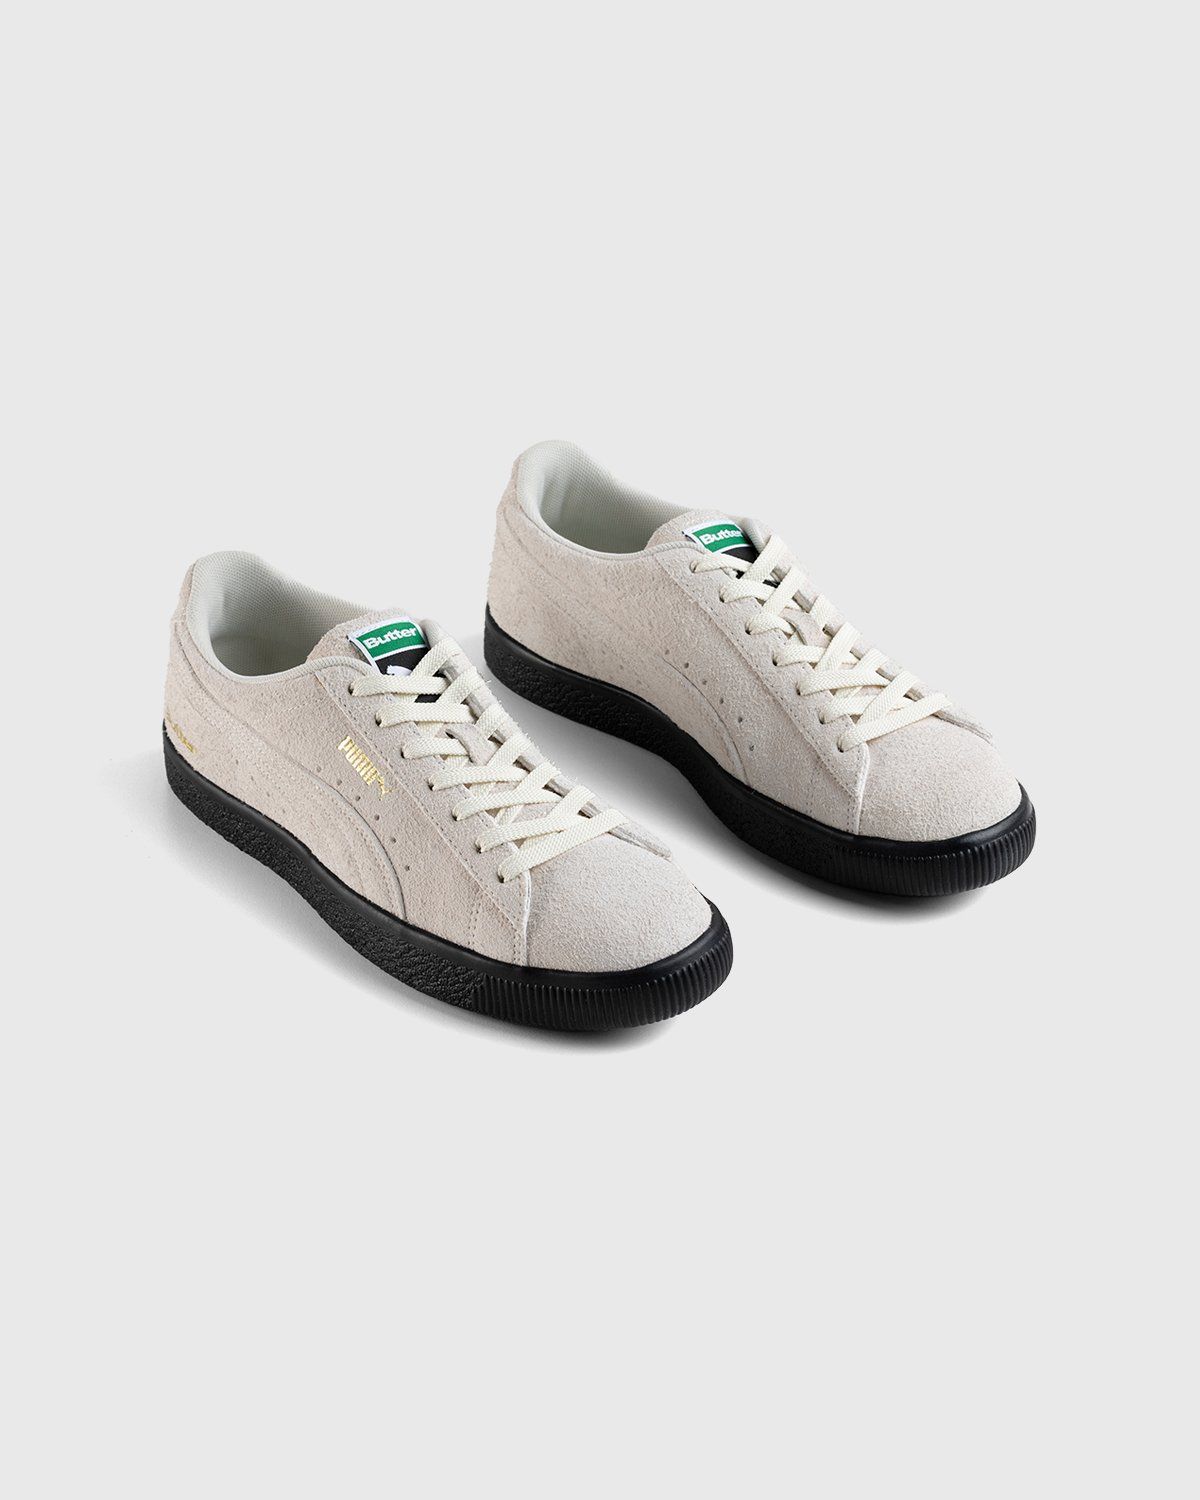 Puma x Butter Goods – Suede VTG Whisper White/Puma Black - Low Top Sneakers - Green - Image 3